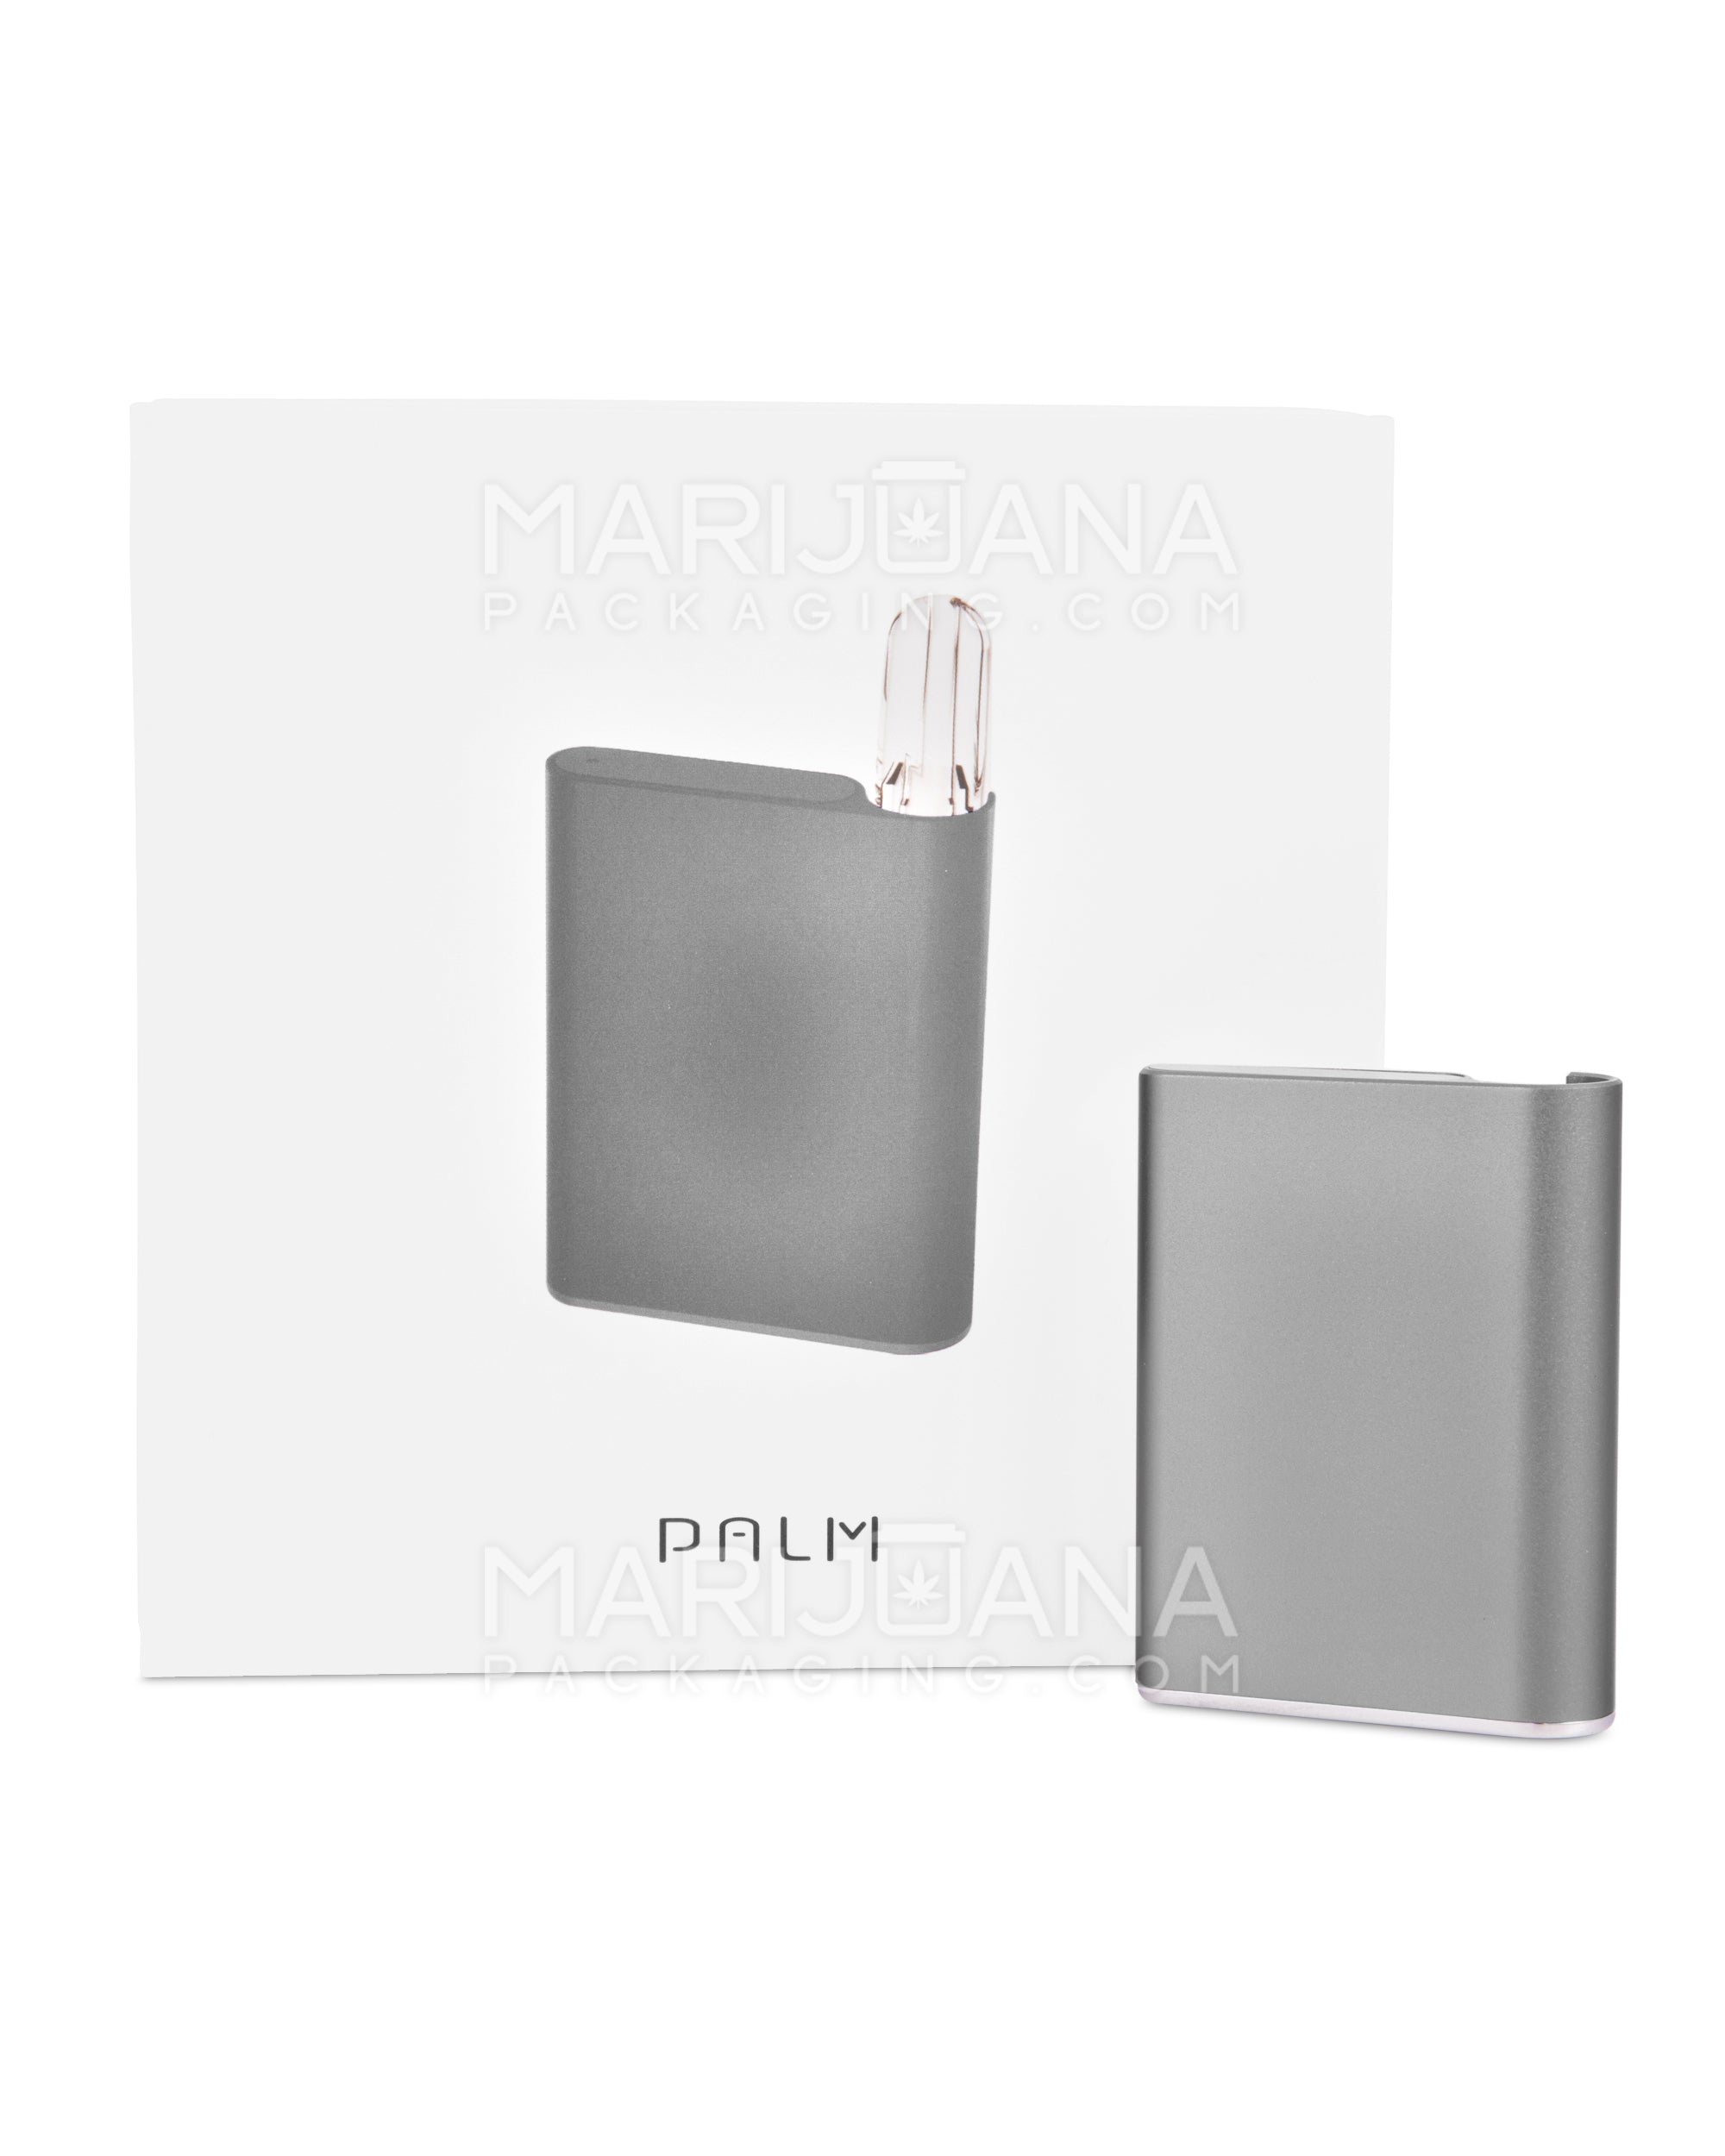 CCELL | Palm Vape Battery with USB Charger | 500mAh - Gray - 510 Thread - 1